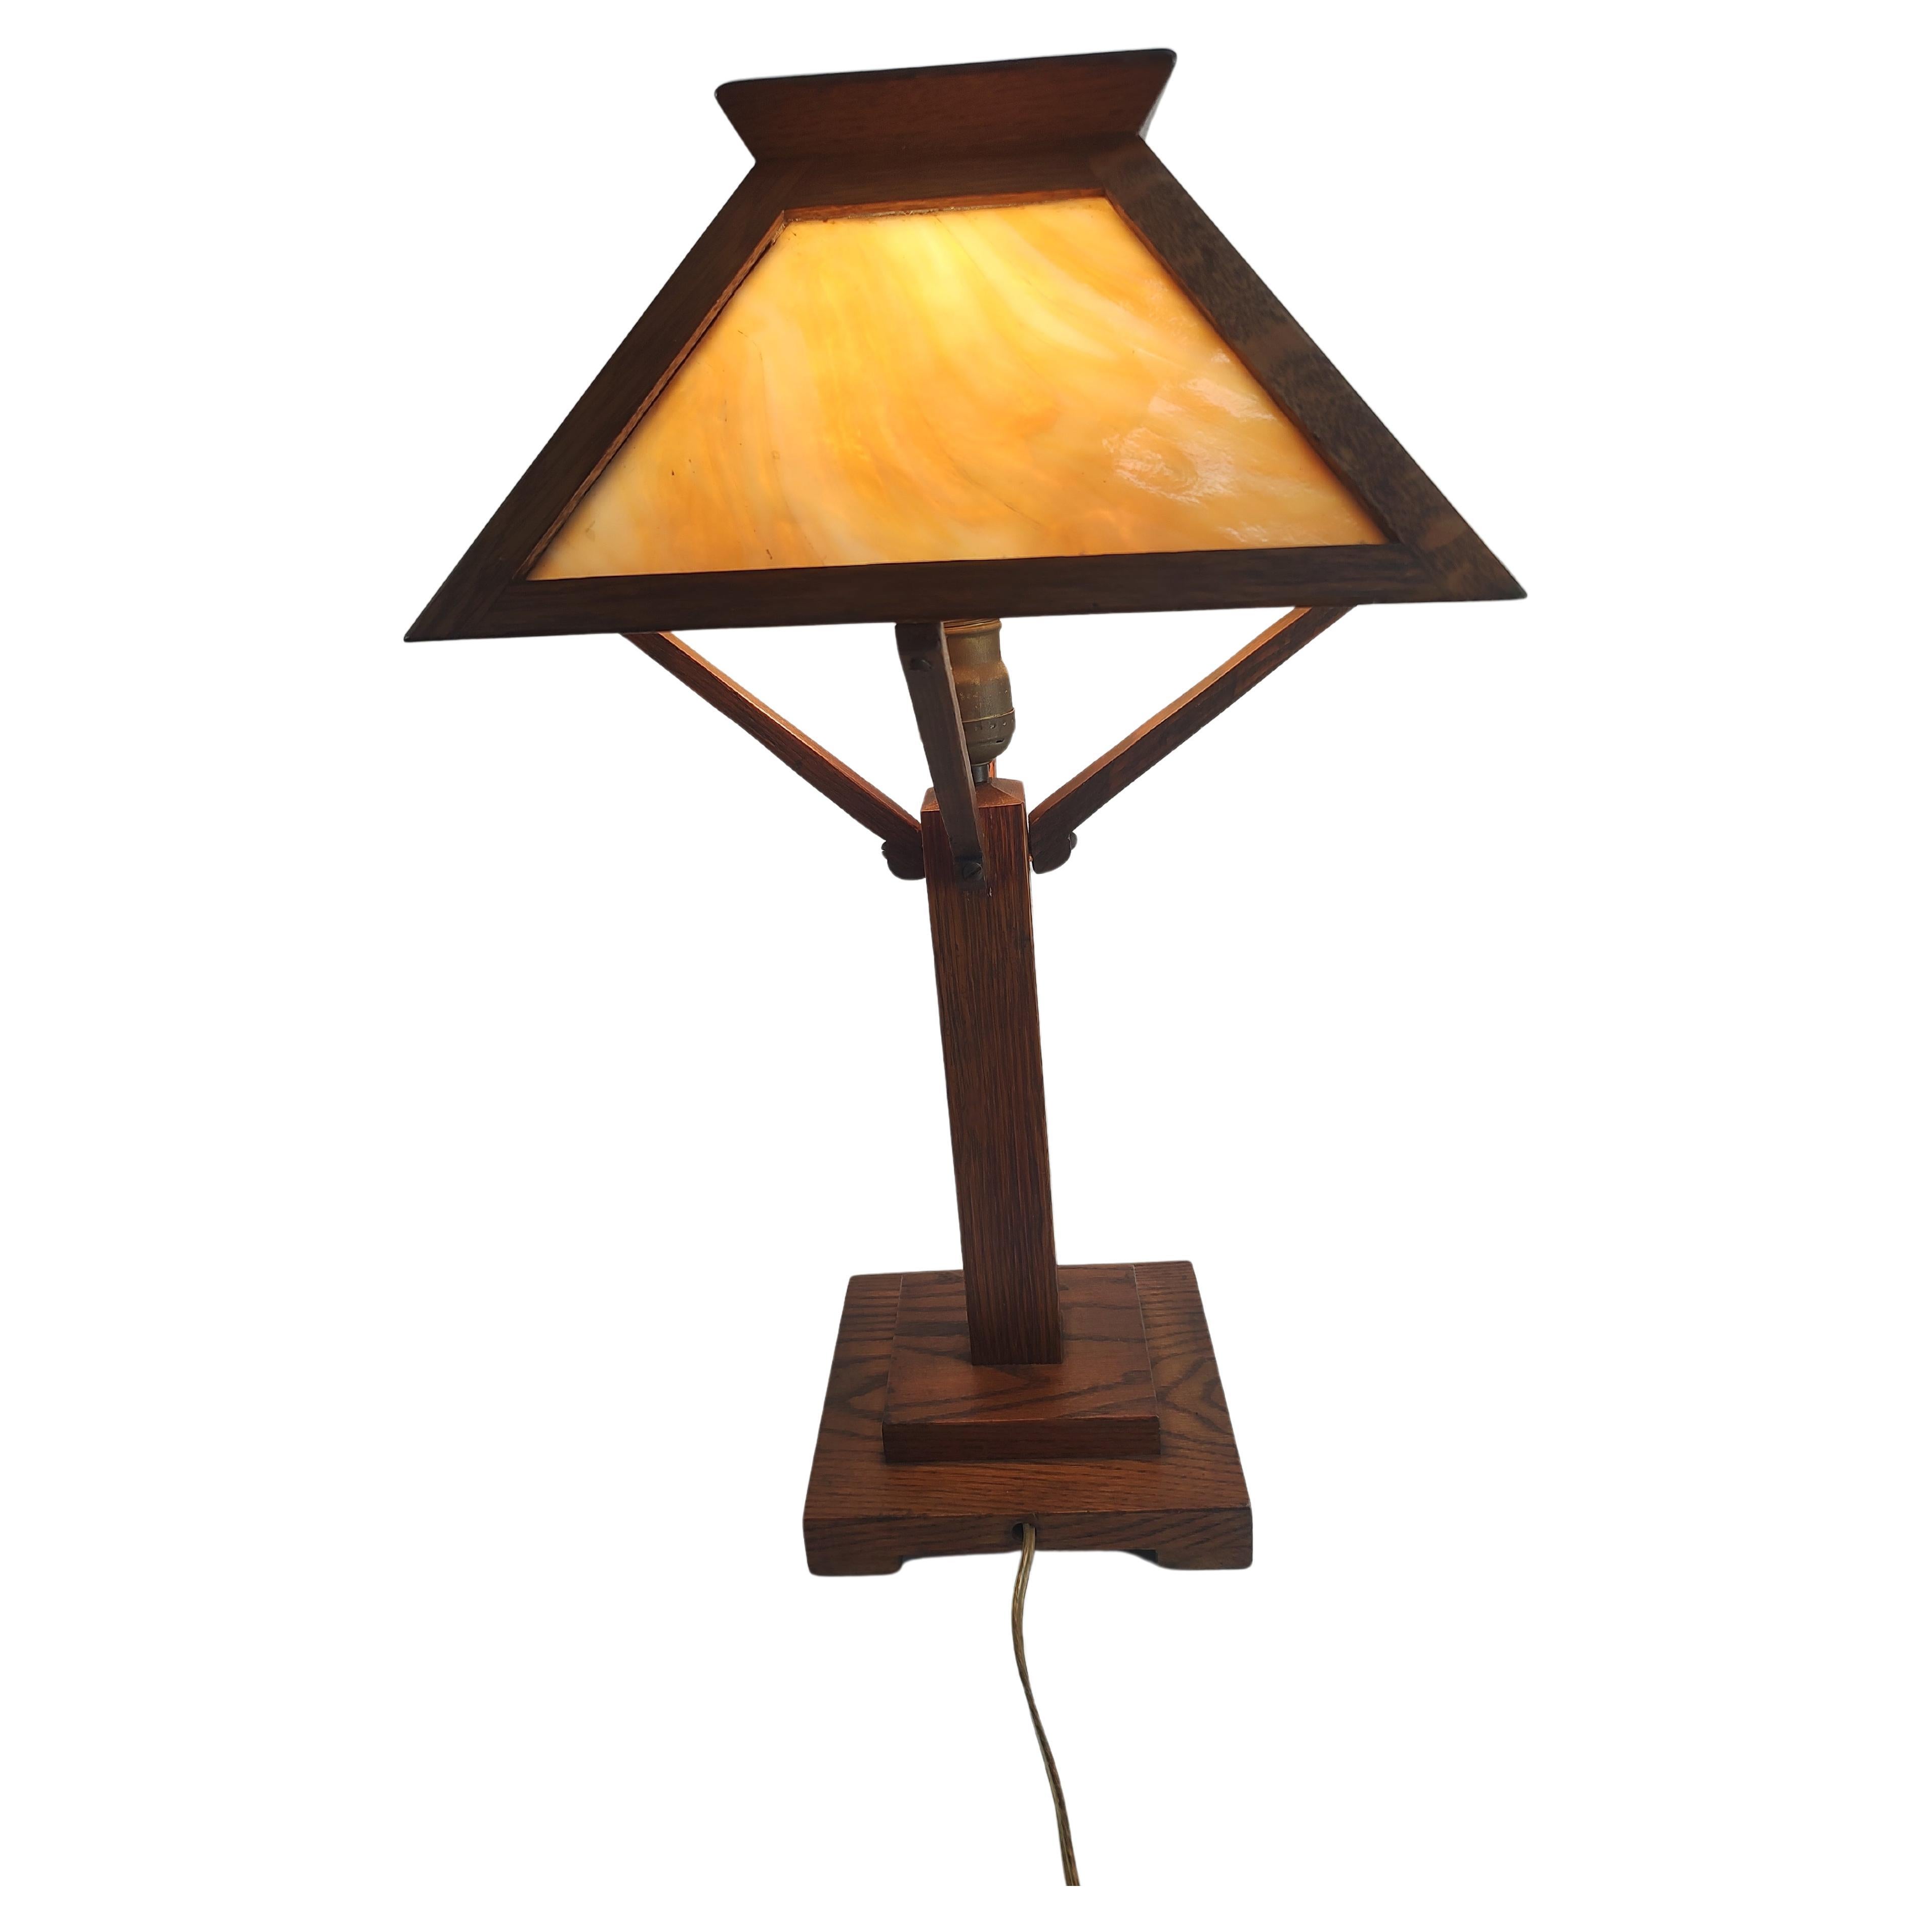 Fantastic simple & elegant arts and crafts mission Oak desk table lamp. Beautiful Carmel Colored Slag Glass in a quarter sawn oak lamp frame. Perfectly proportioned and in excellent antique condition with sound wiring. 